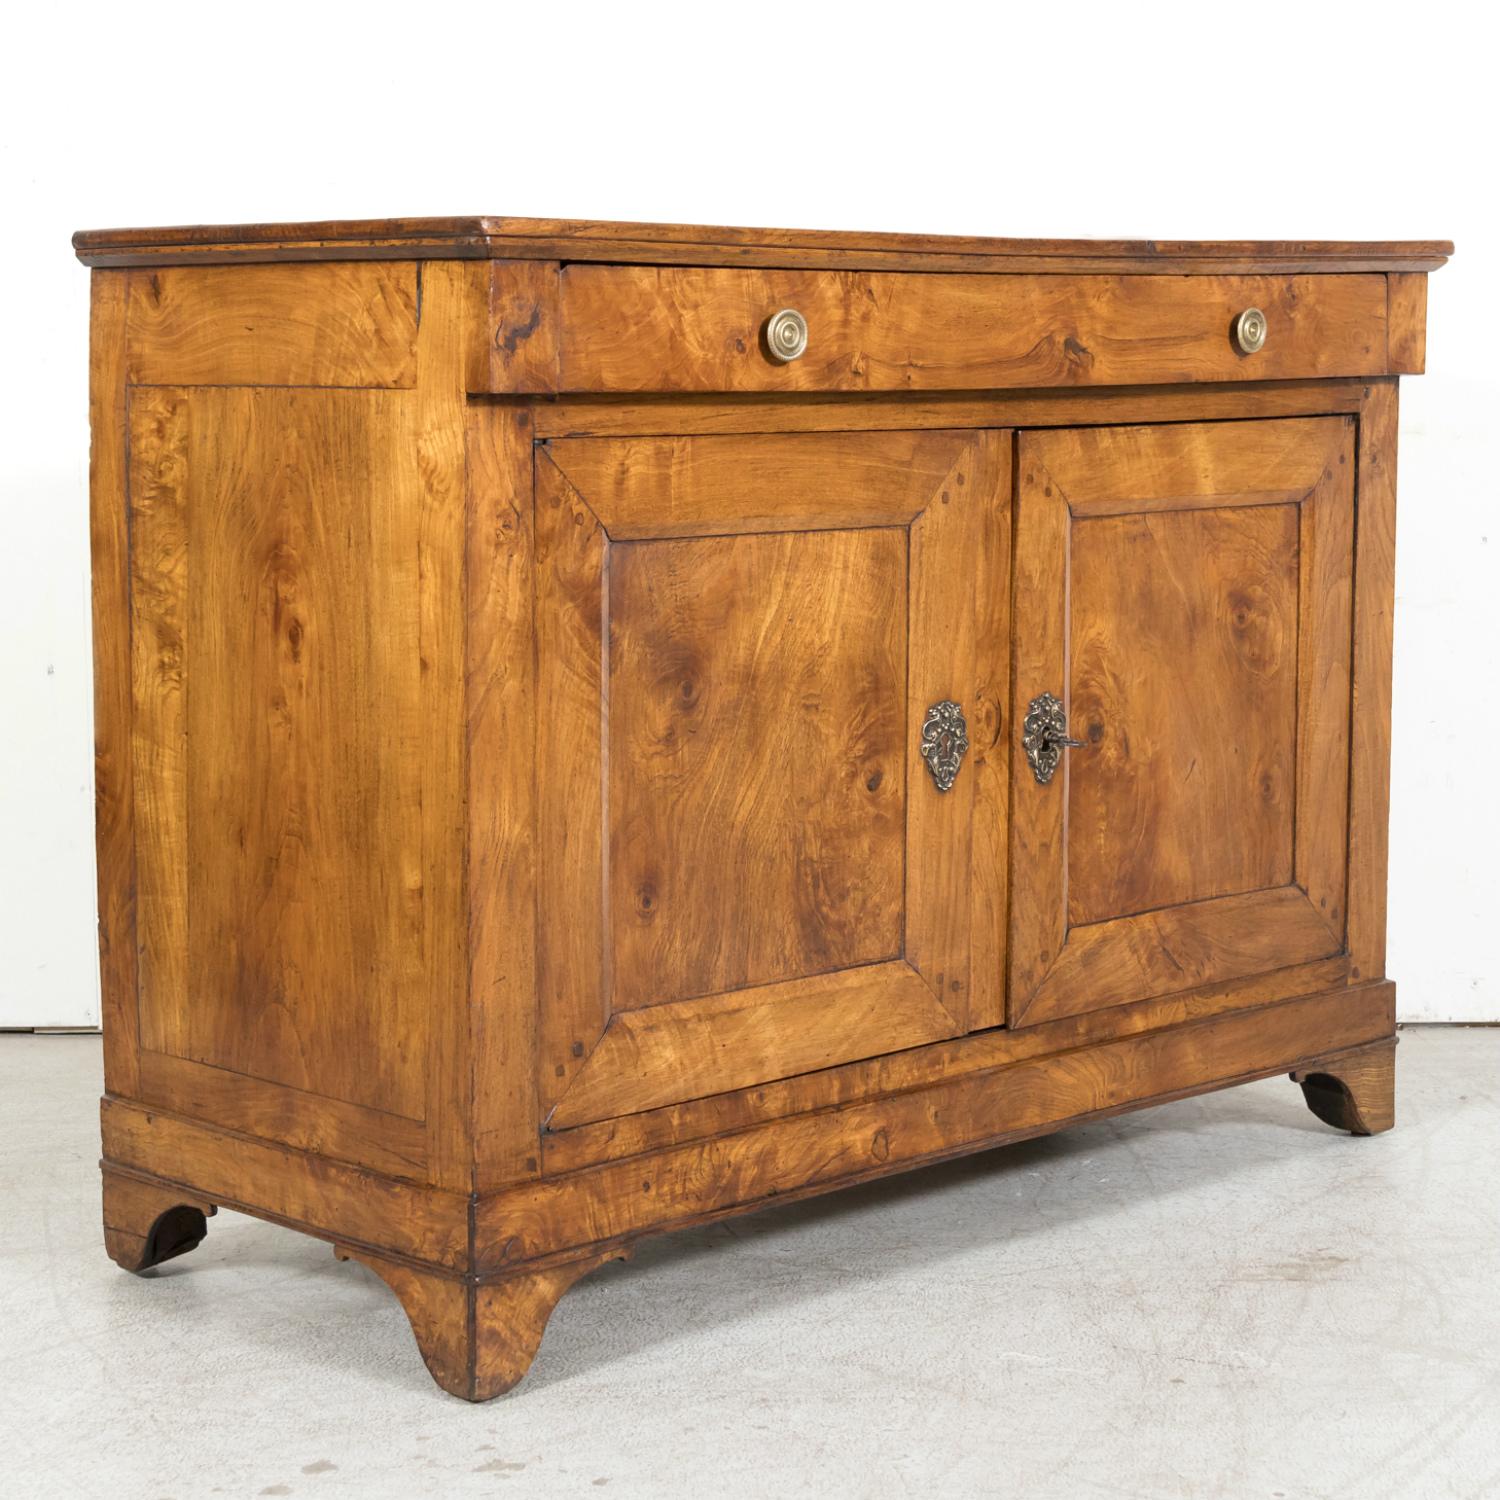 A 19th century French Louis Philippe period buffet handcrafted of burled chestnut in the South of France, circa 1840s, having a rectangular plank top sitting above two drawers with circular brass pulls over two doors that open to reveal a single